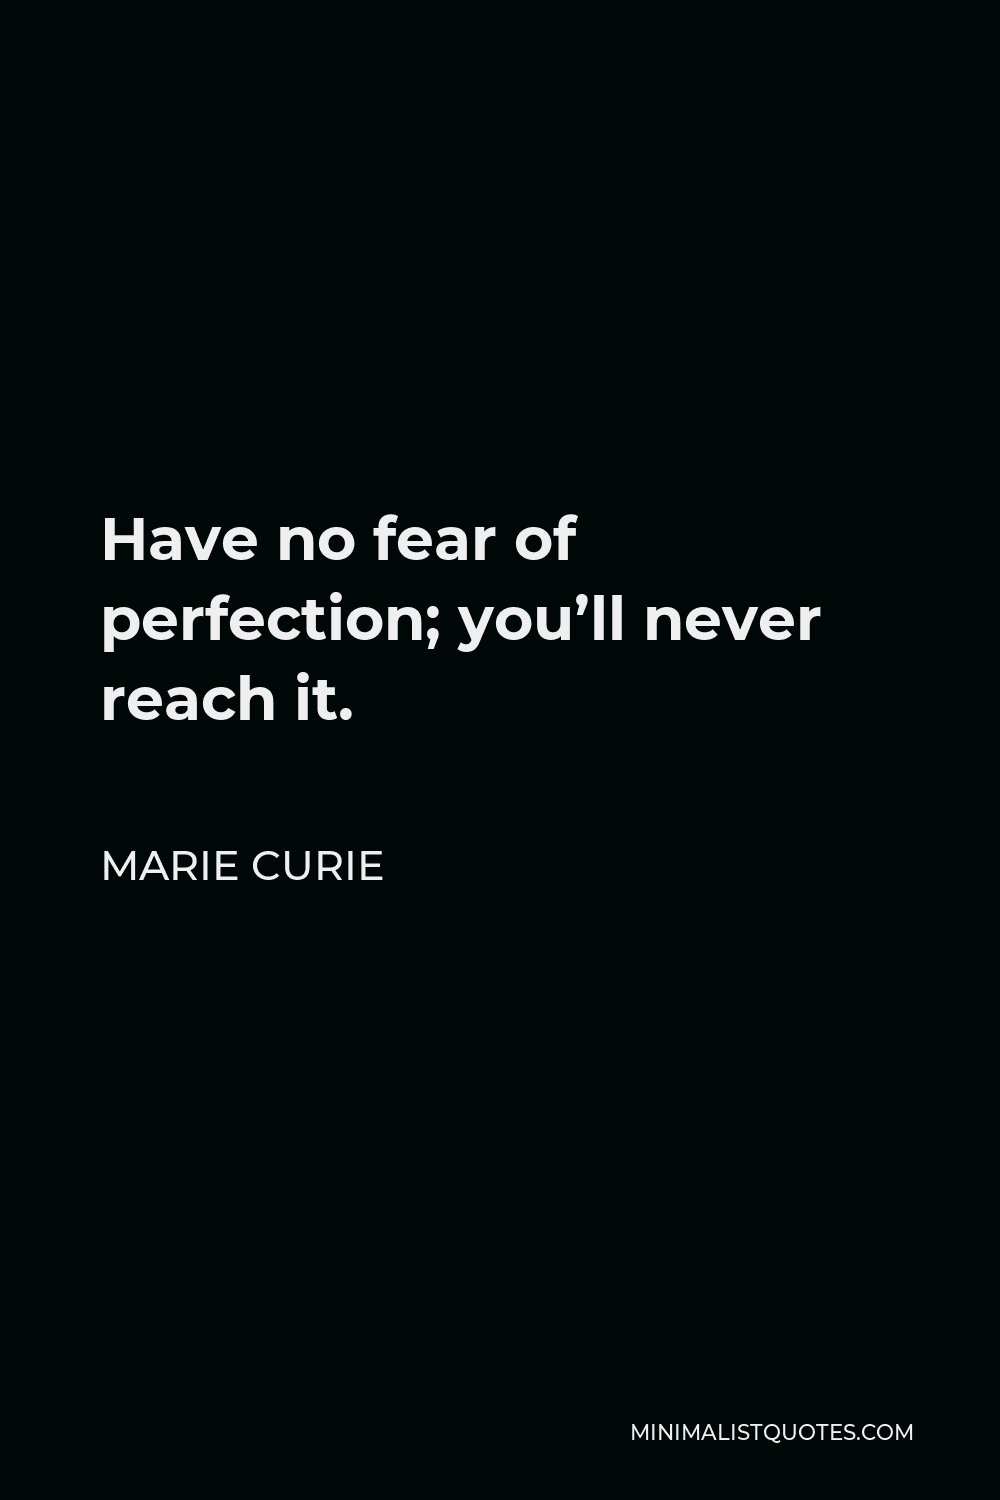 Marie Curie Quote - Have no fear of perfection; you’ll never reach it.